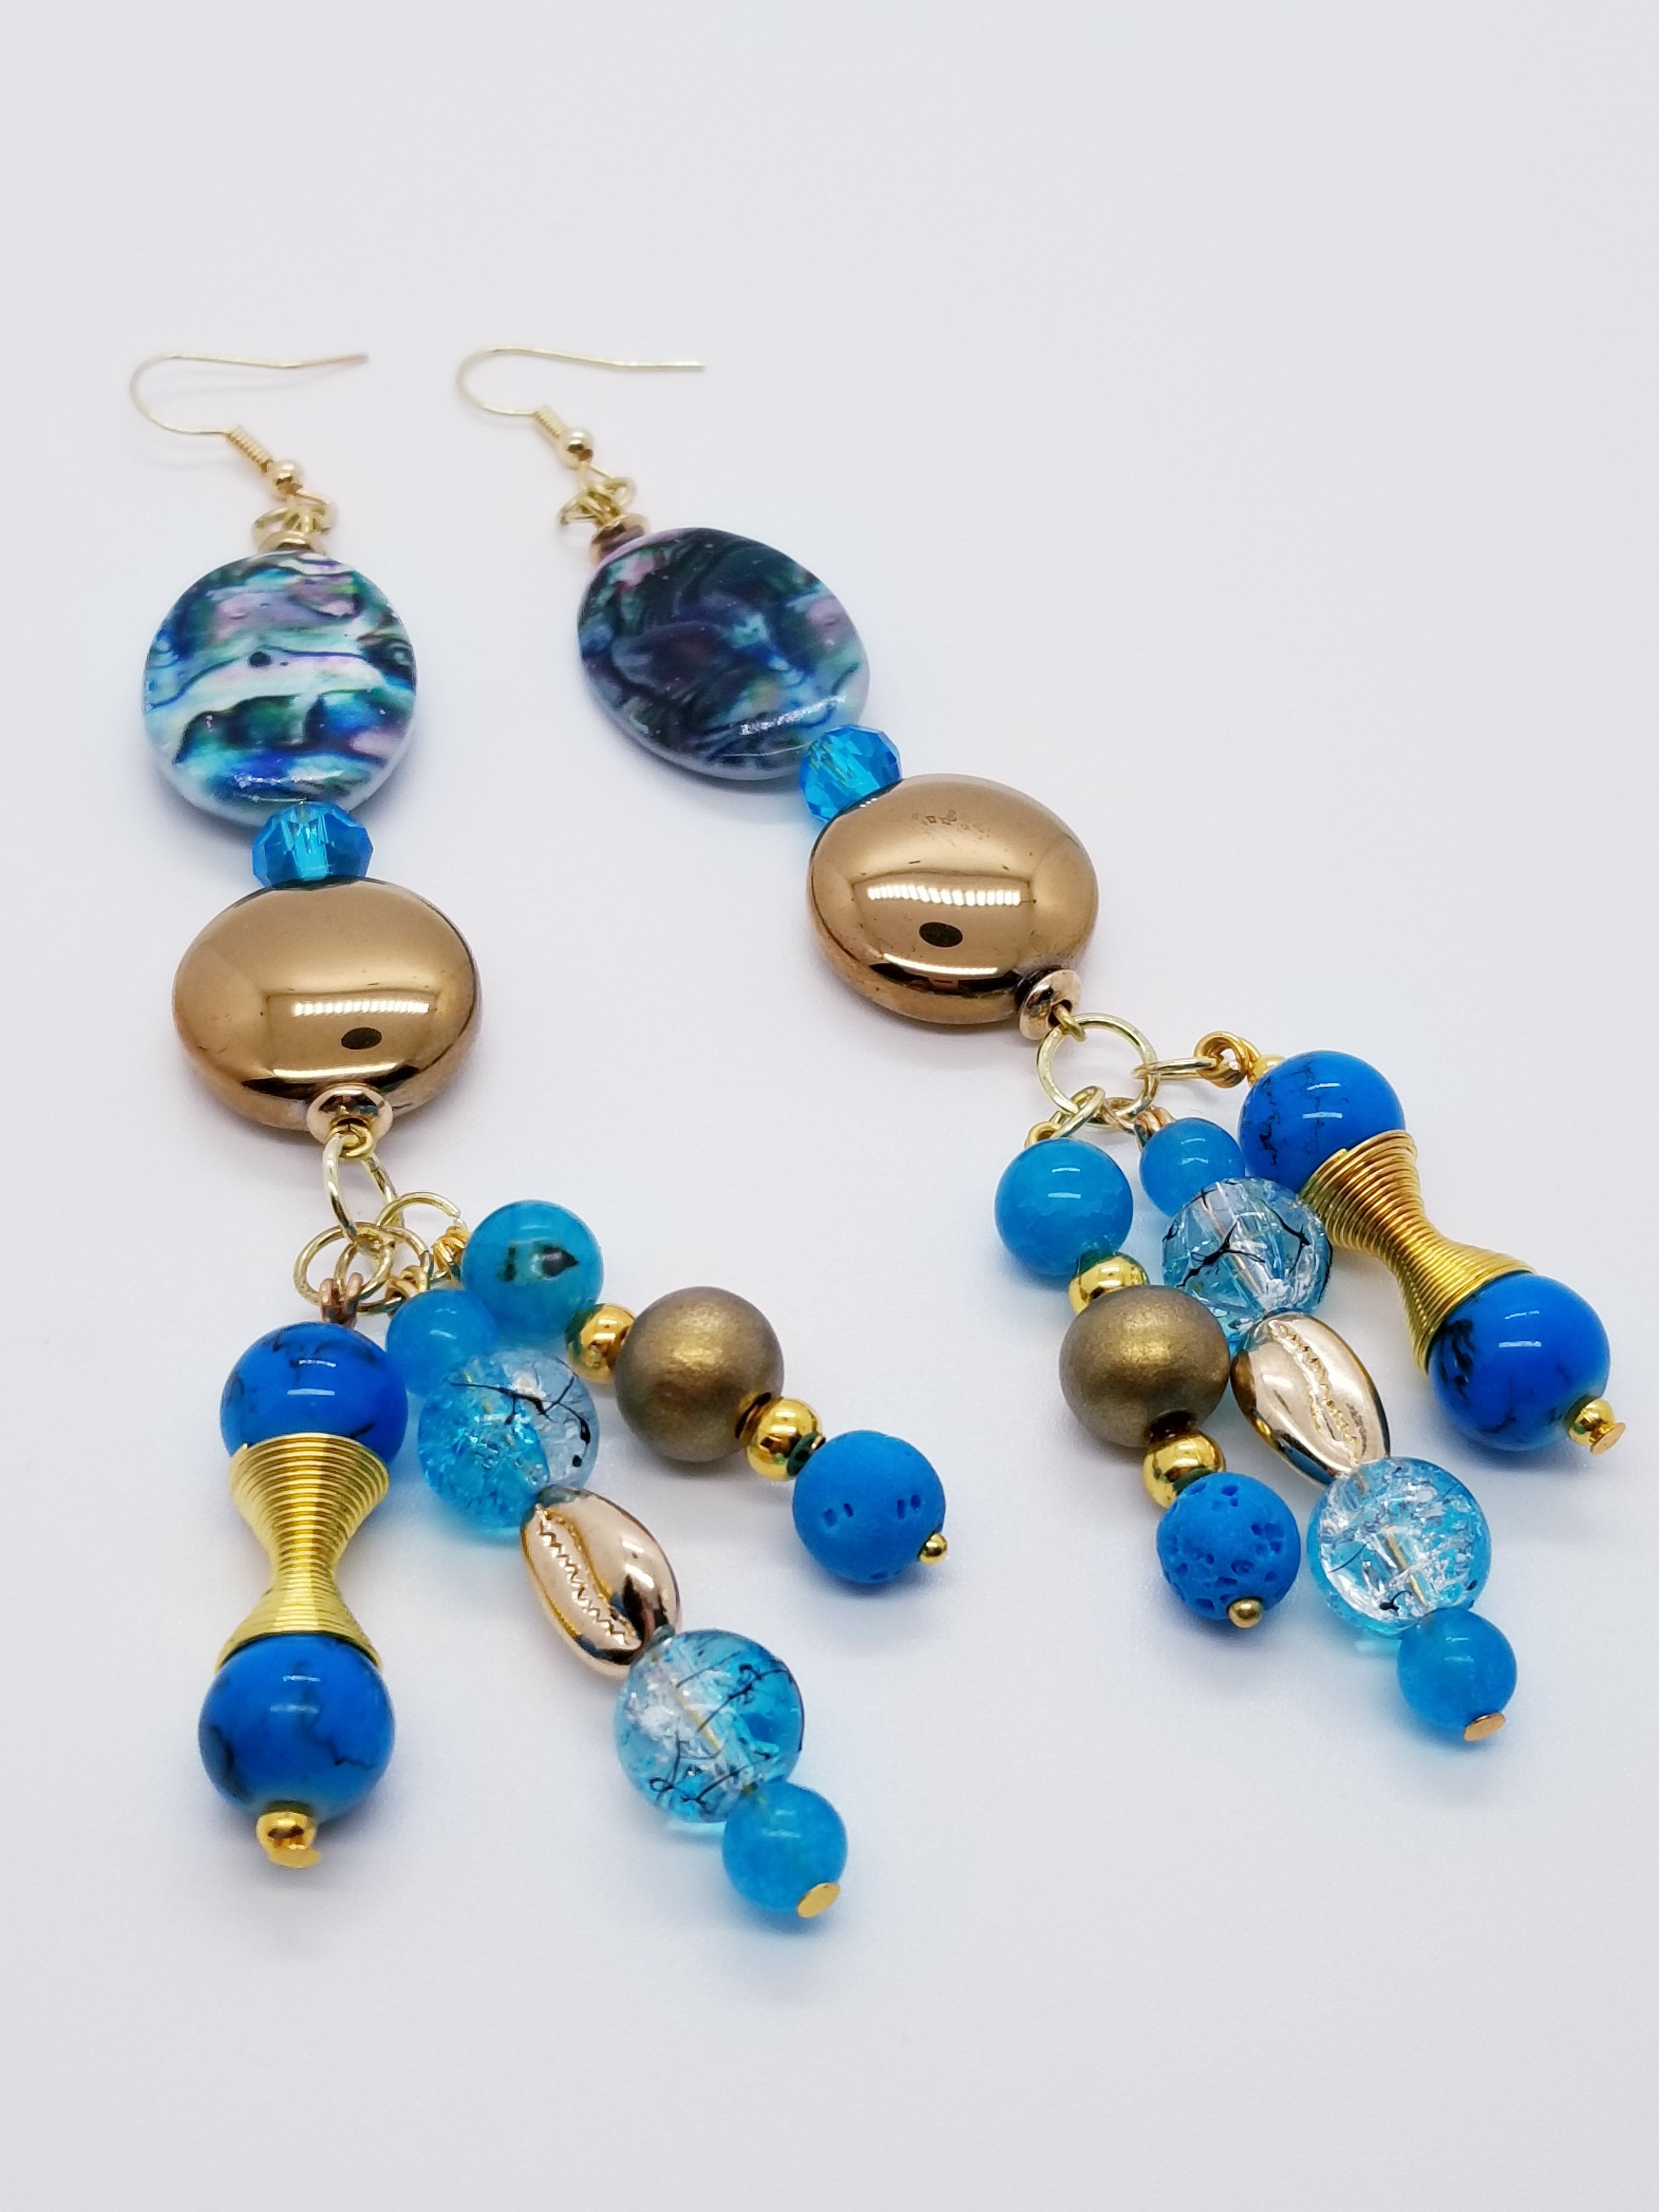 PLEASE BE AWARE: Earrings Hang Past Shoulders   Length: 5.5 inches | Weight: 1.3 ounces  Distinctly You! The earrings are handmade using aqua ceramic swirl oval beads, gold glass discs, 10mm gold wood beads, 10mm blue Czech glass beads, 6mm blue glass beads, gold head pins, and hypoallergenic hooks with back closures. 